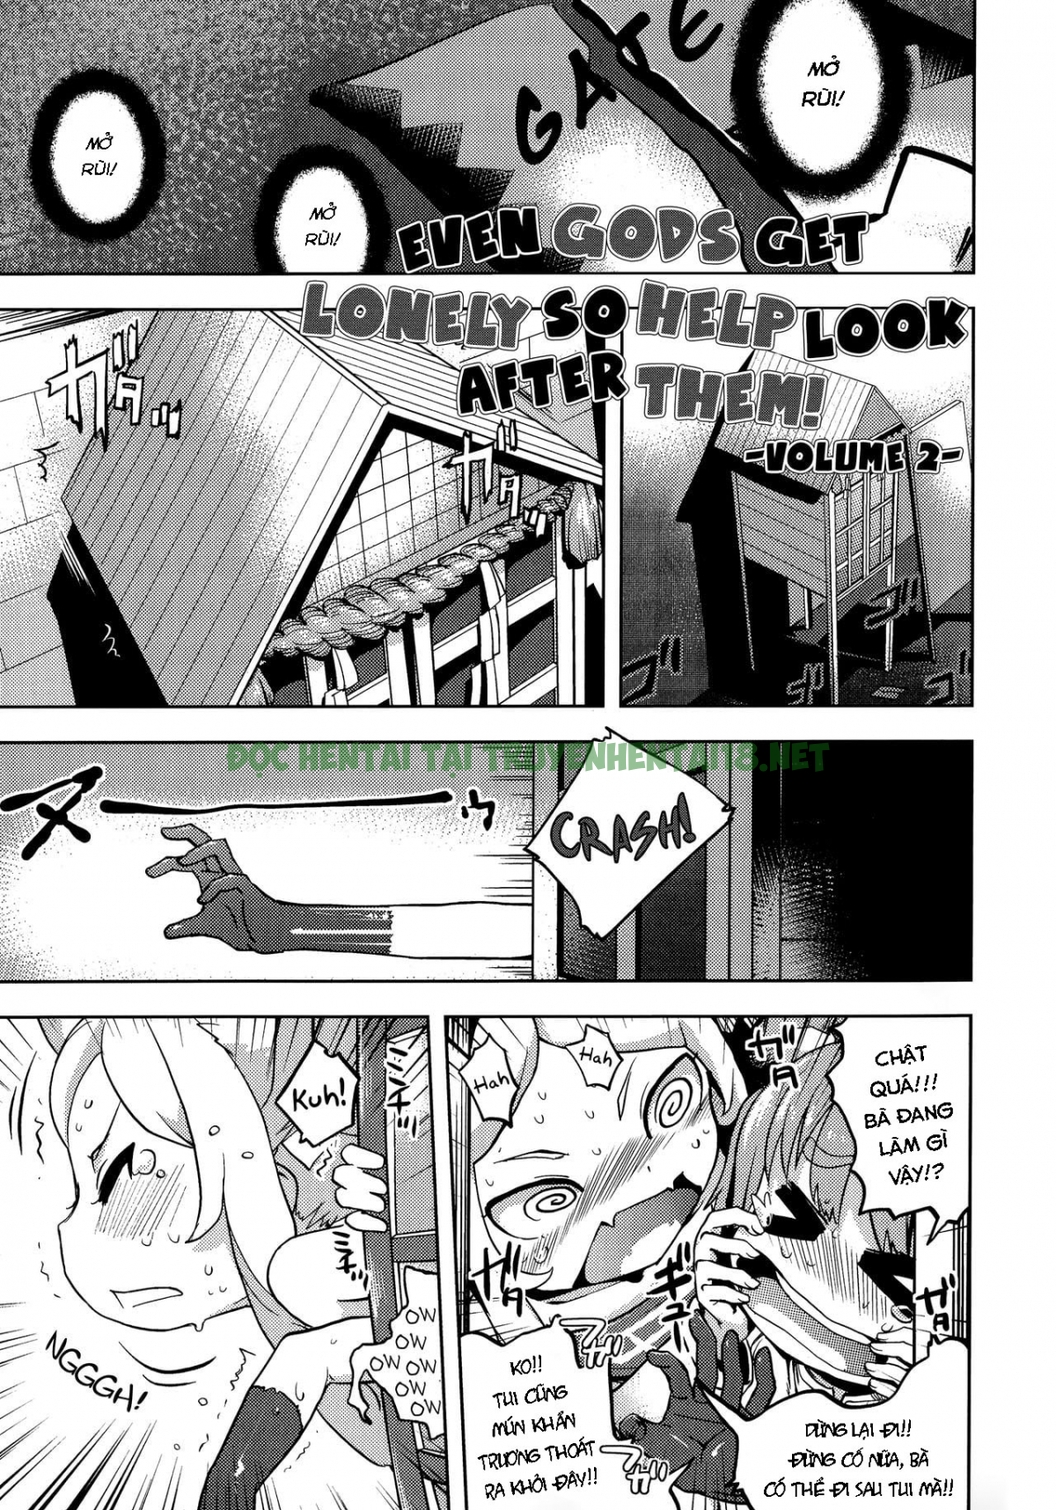 Xem ảnh Even Gods Get Lonely So Help Look After Them - Chapter 2 - 0 - Hentai24h.Tv